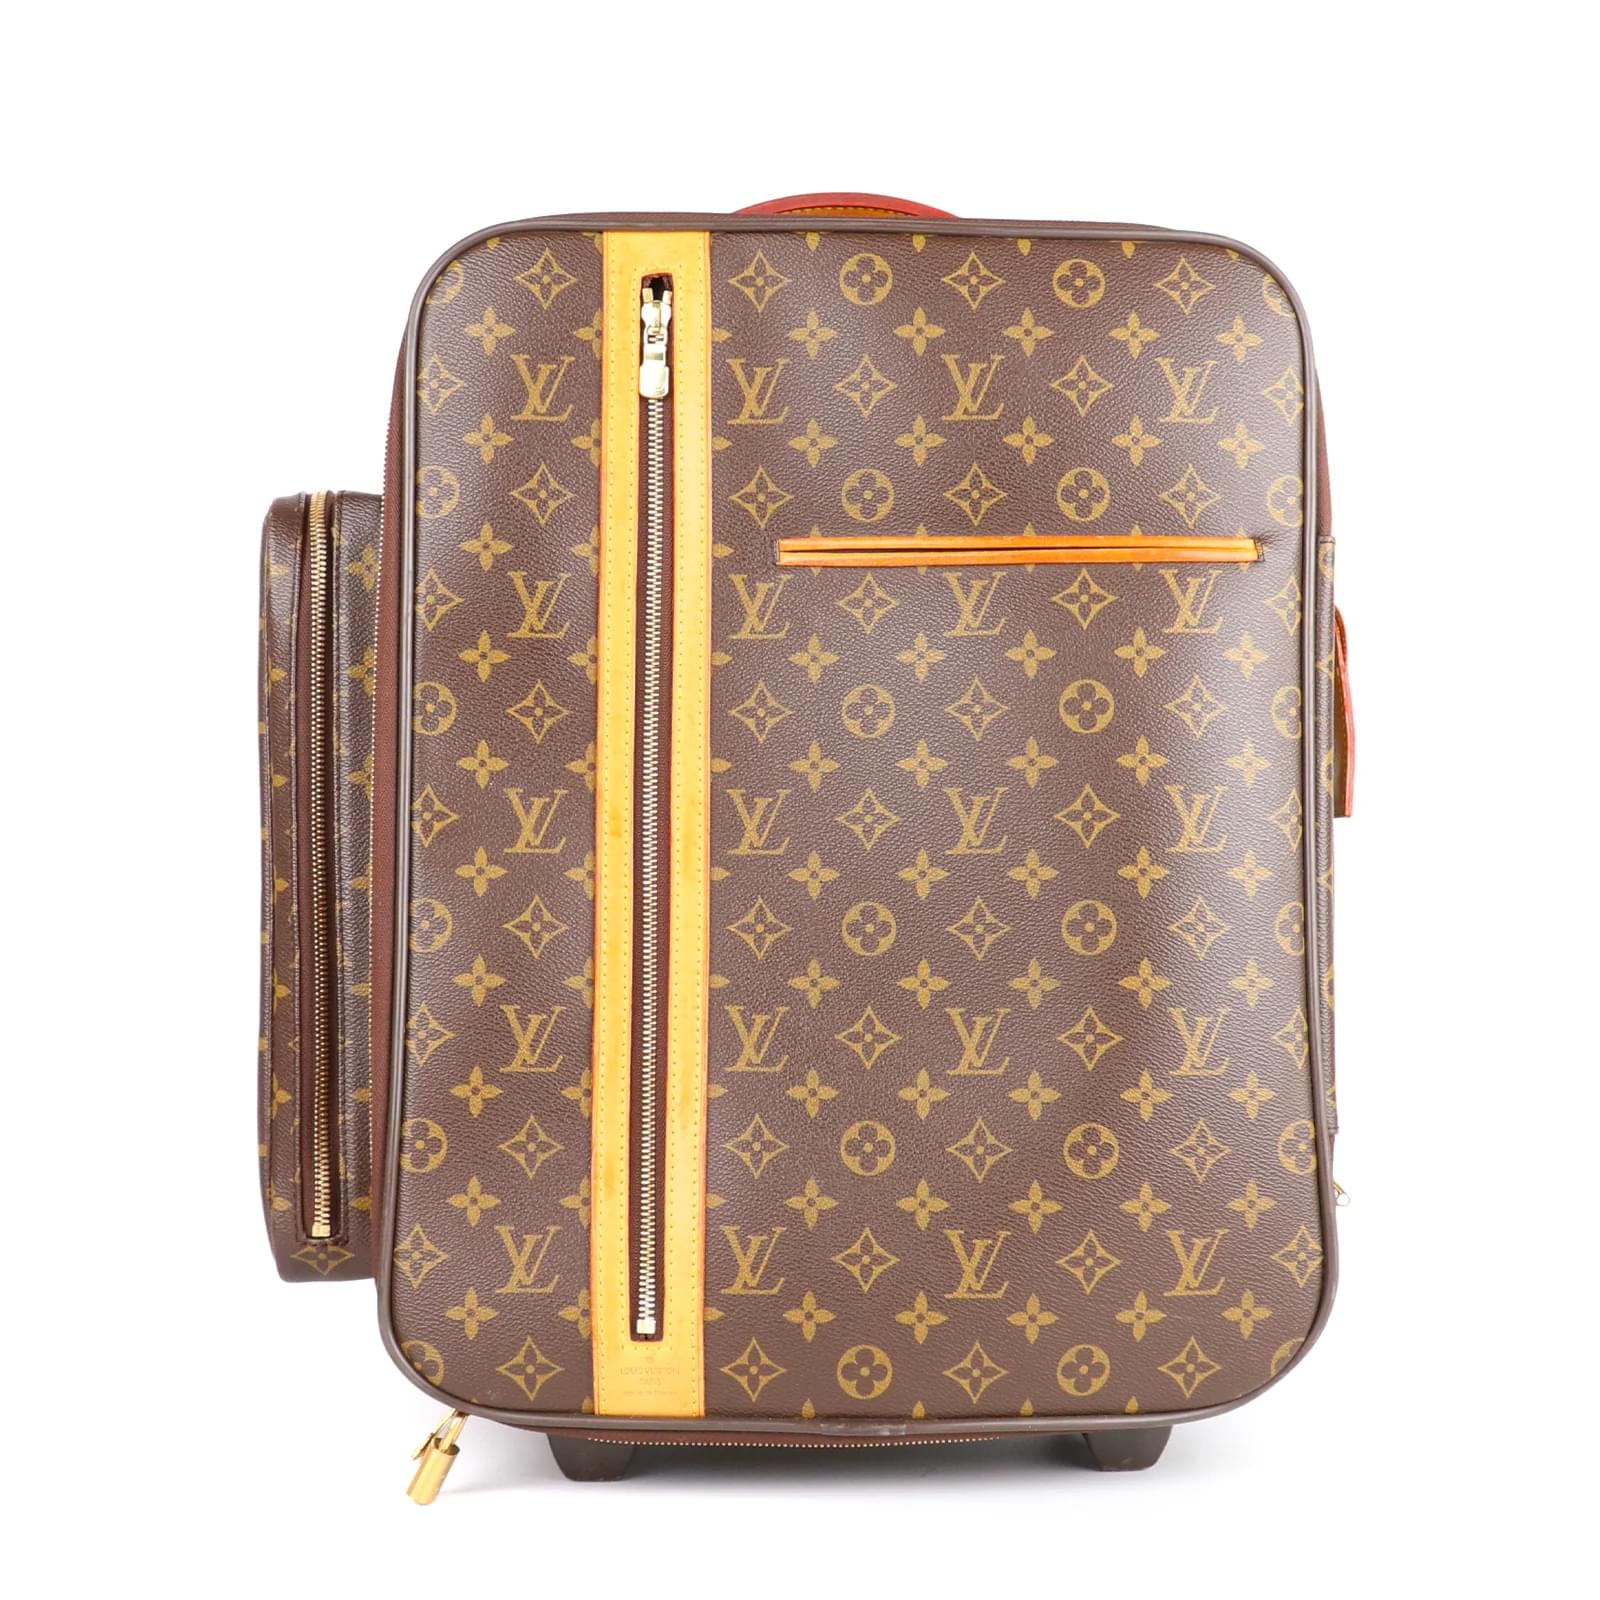 VINTAGE! LOUIS VUITTON Brown Monogram Leather Carry-on Bag Suitcase Luggage